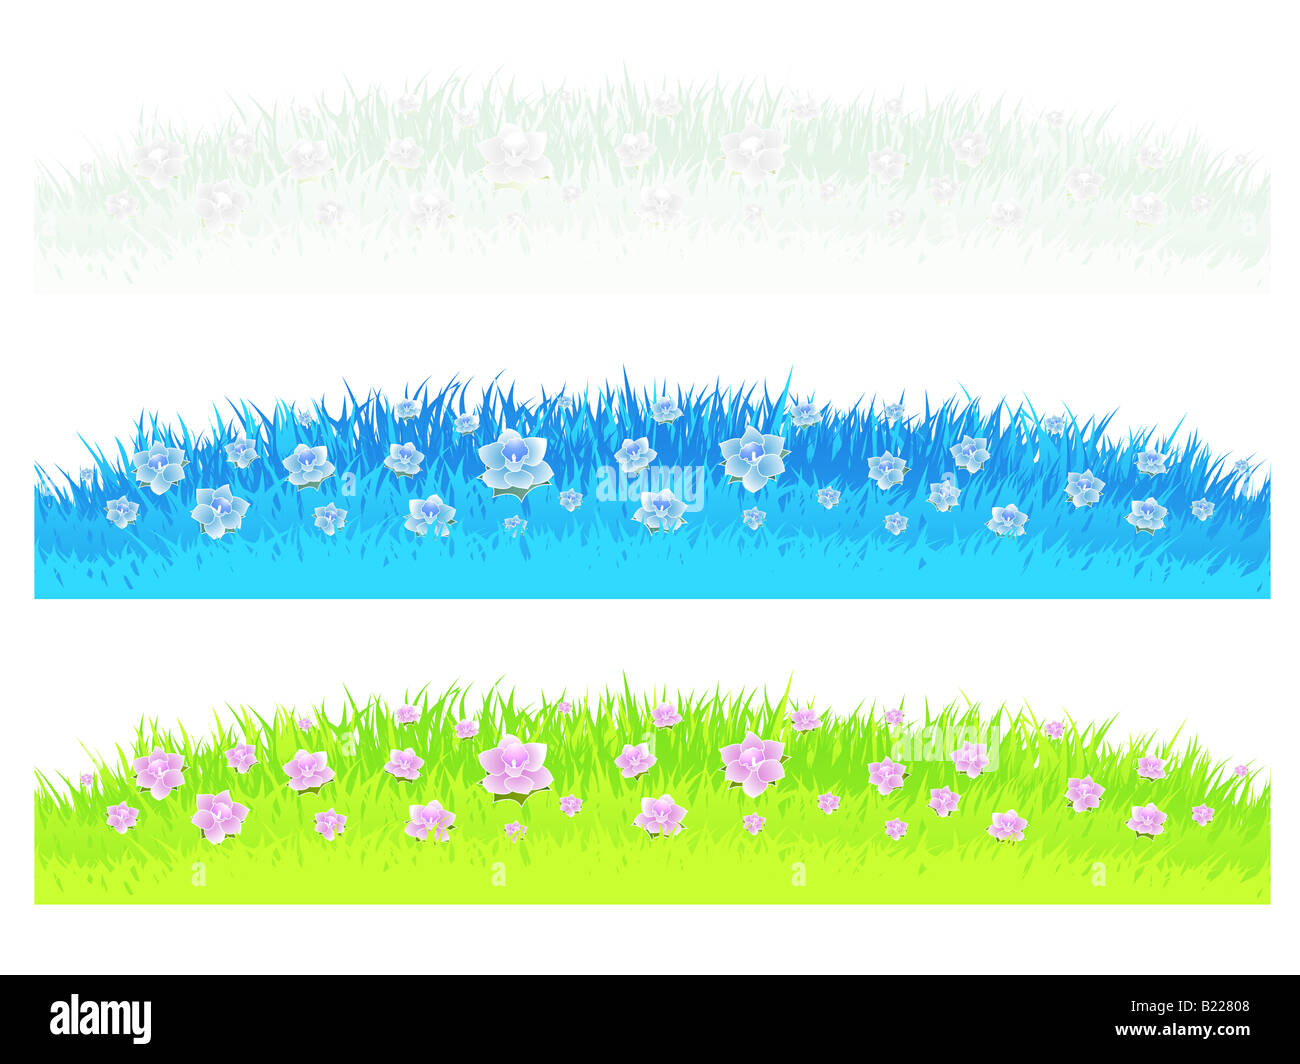 Vector illustrations of three differently colored grass and lawn design elements with beautiful flowers Stock Photo